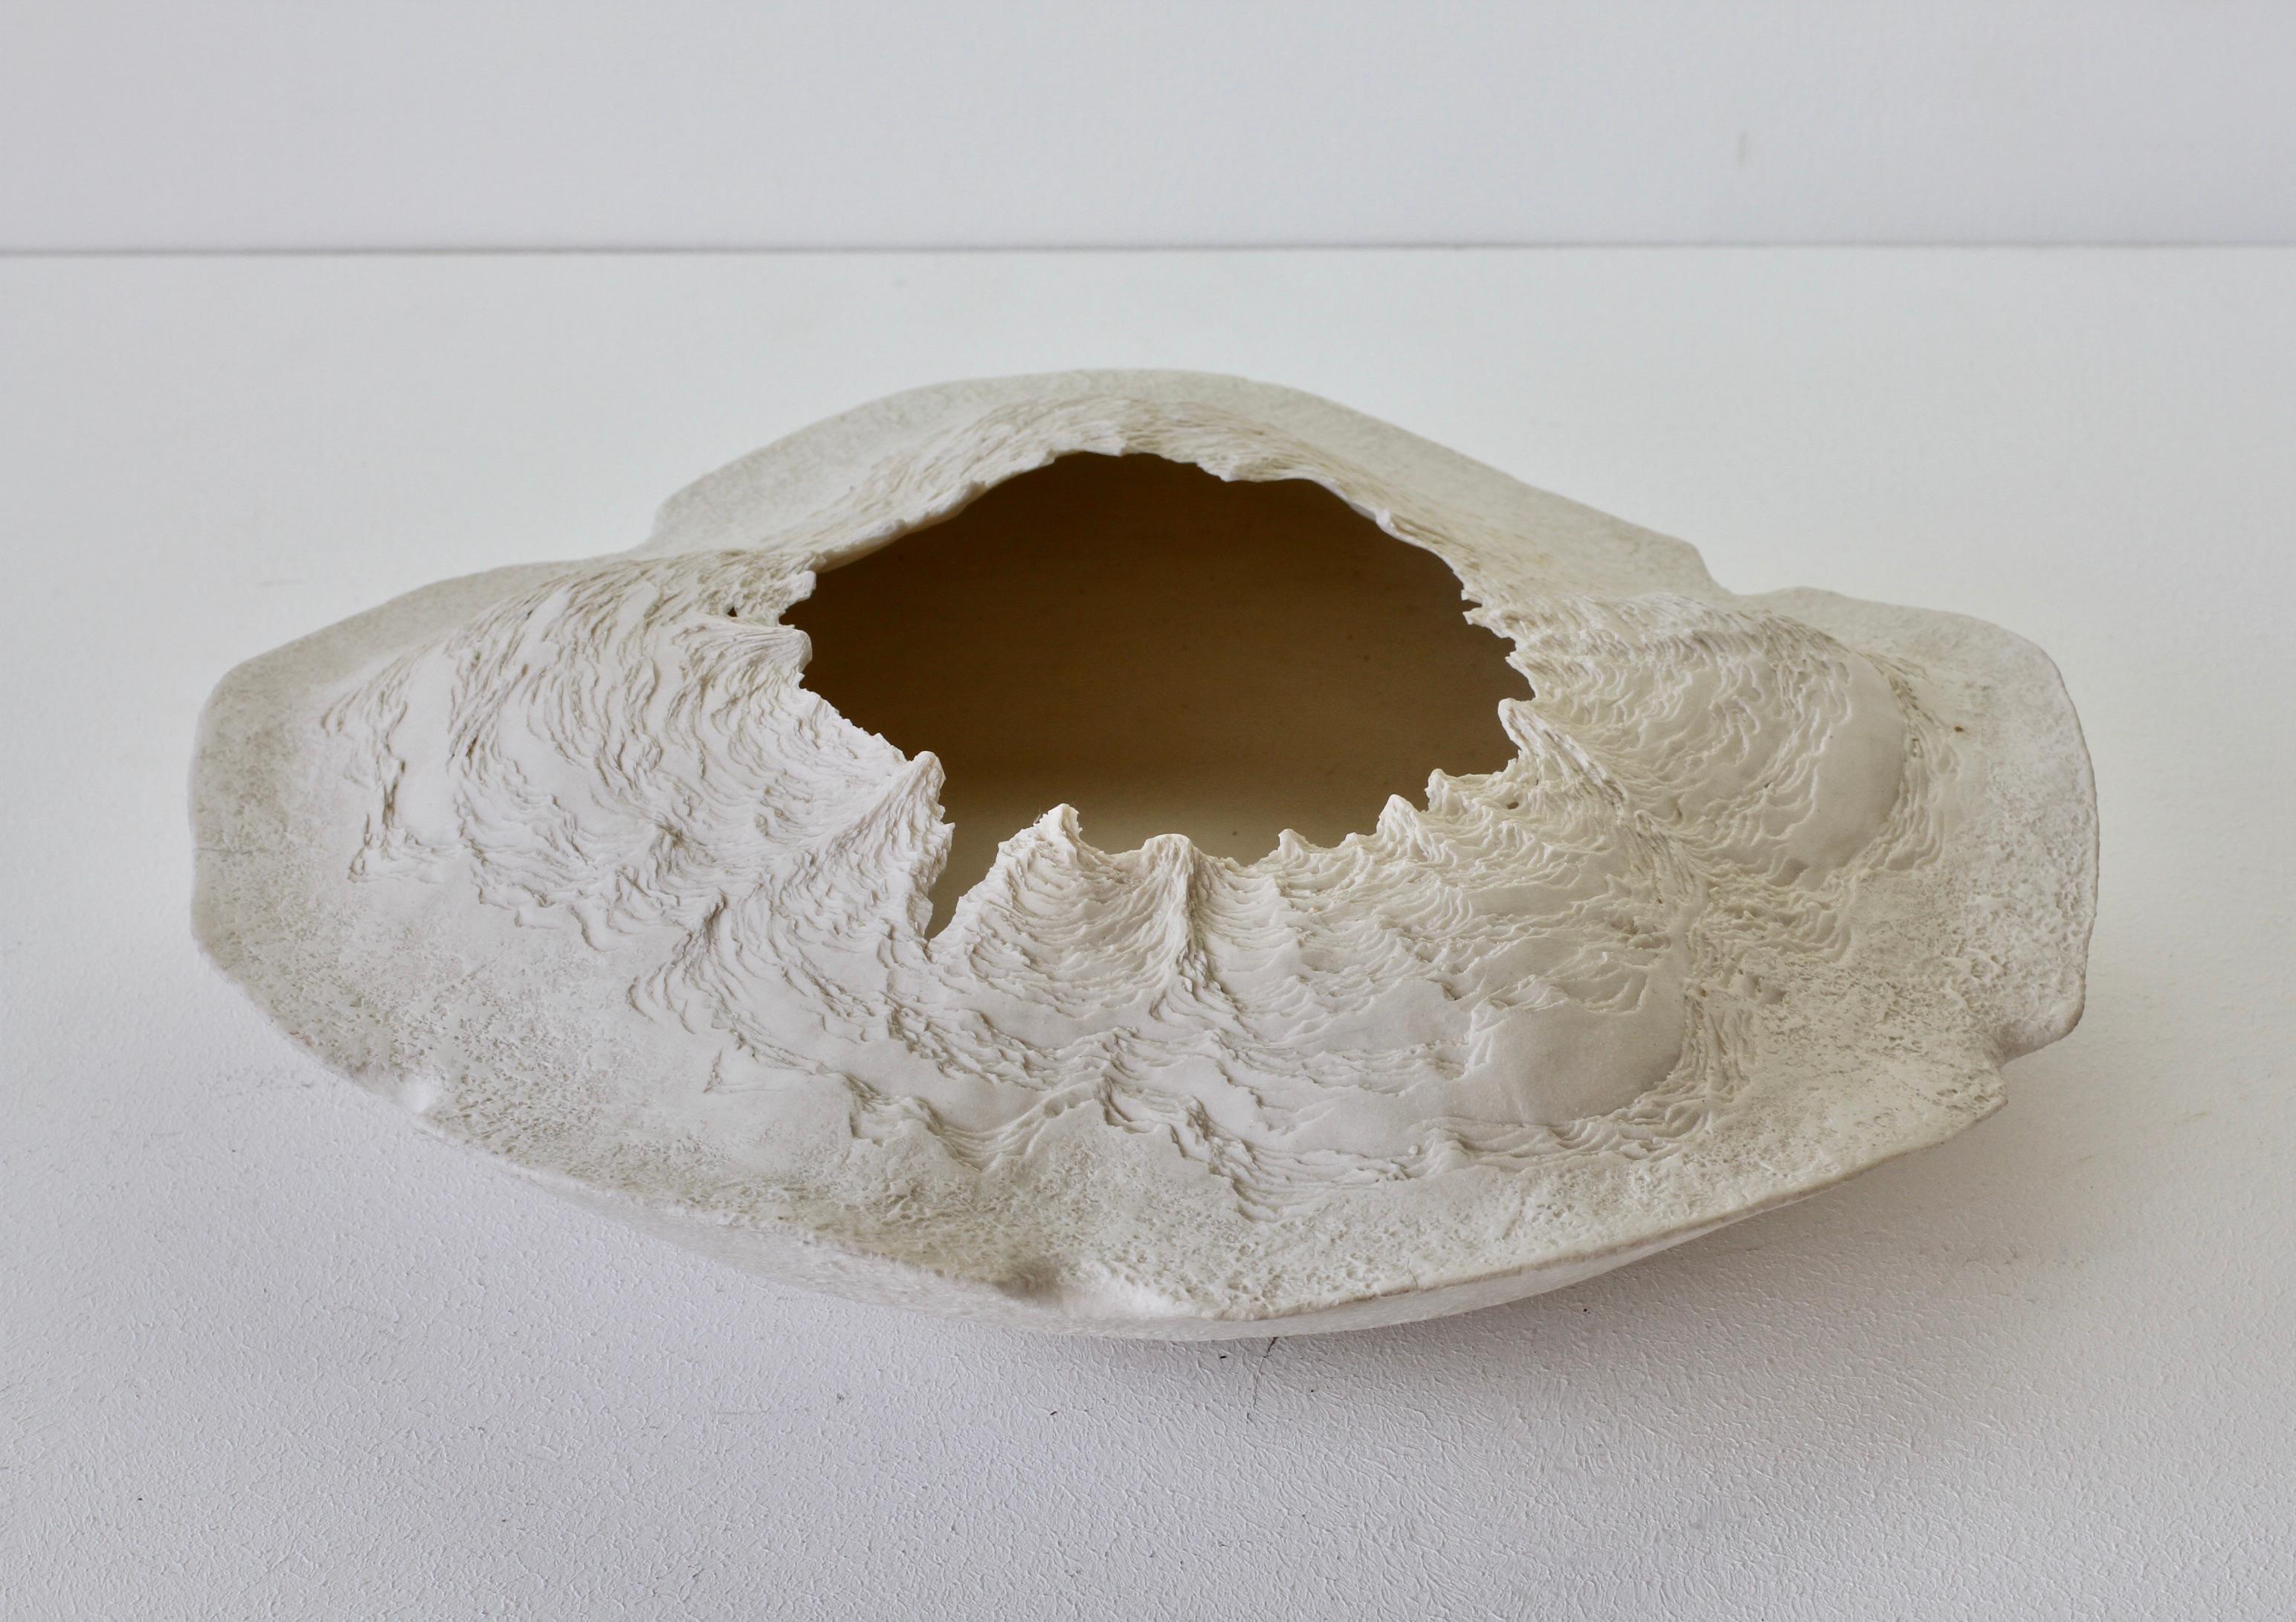 Maggie Barnes Carved White Organic Art Pottery Sculpture Bowl or Dish circa 1987 For Sale 1